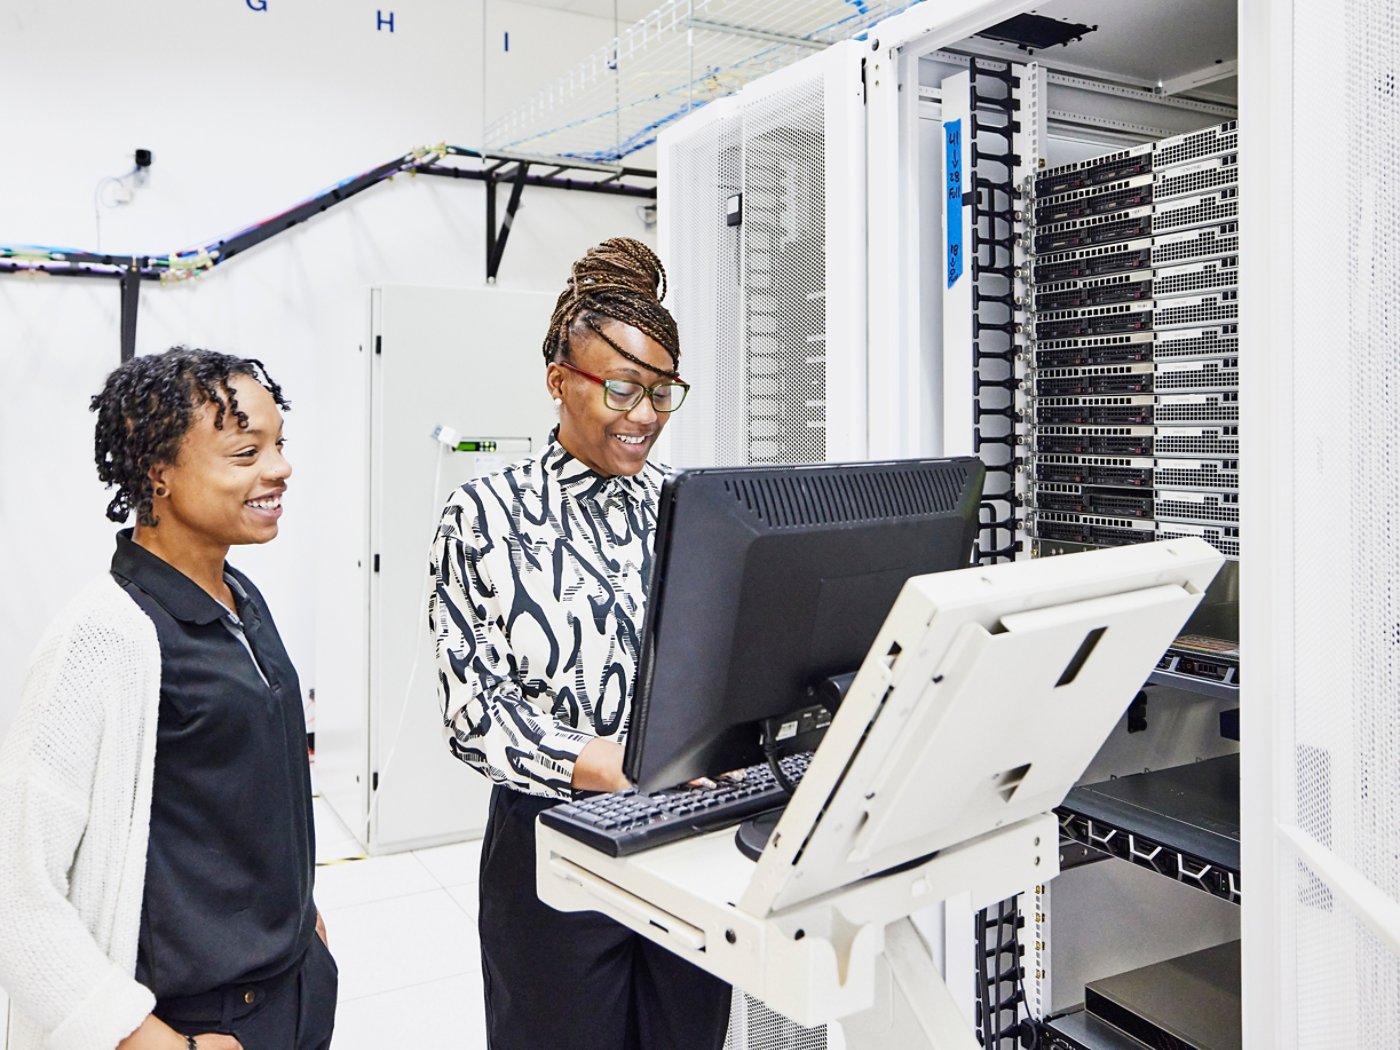 Medium wide shot of smiling female IT professionals in discussion while configuring server in data center